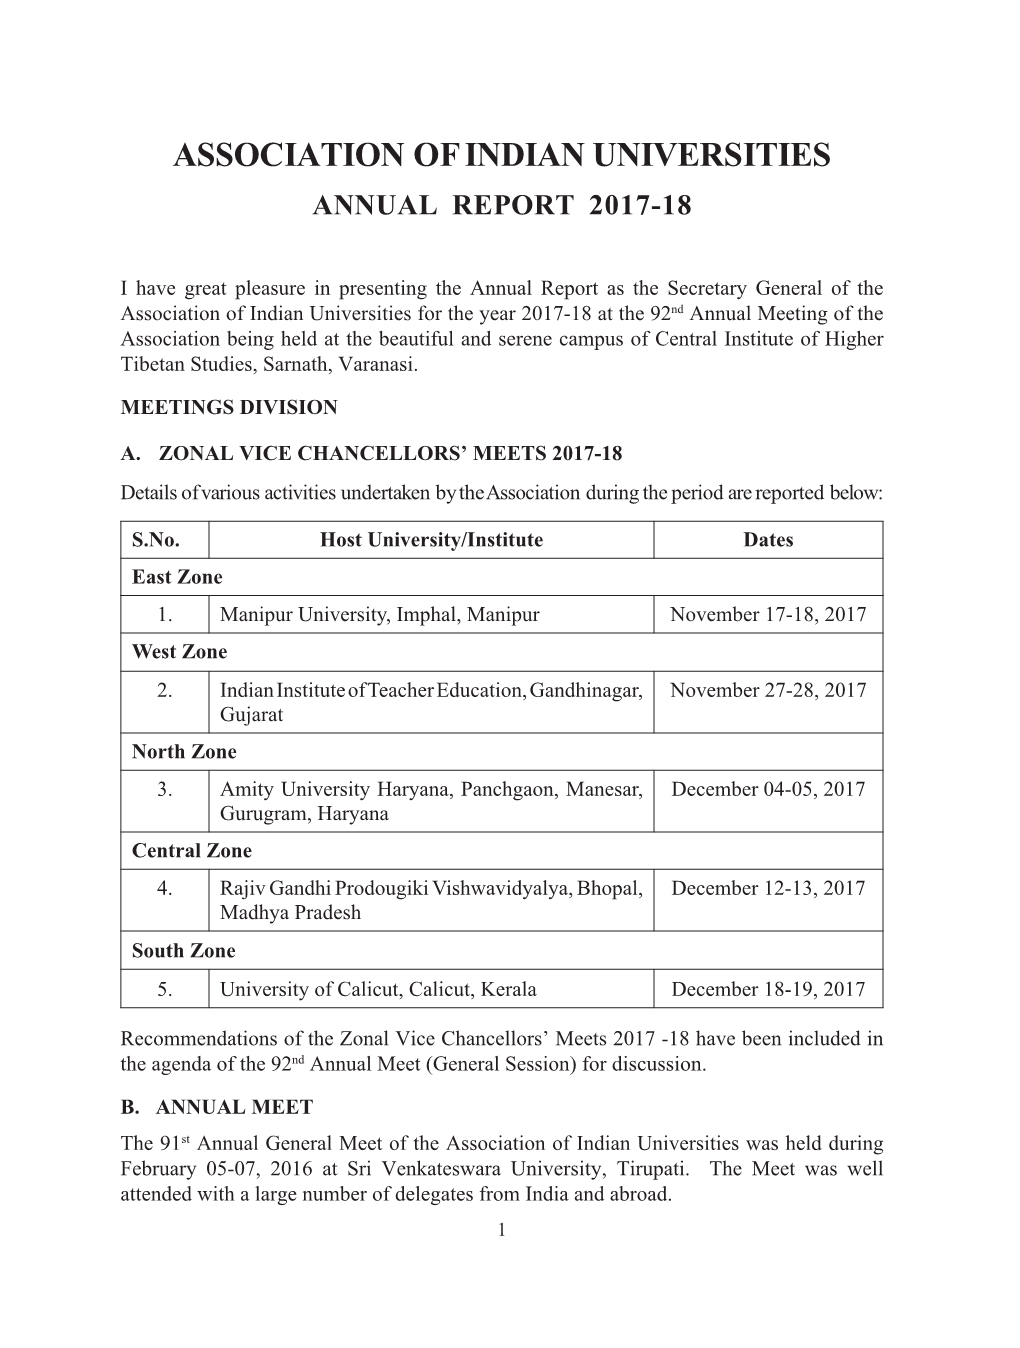 Association of Indian Universities Annual Report 2017-18